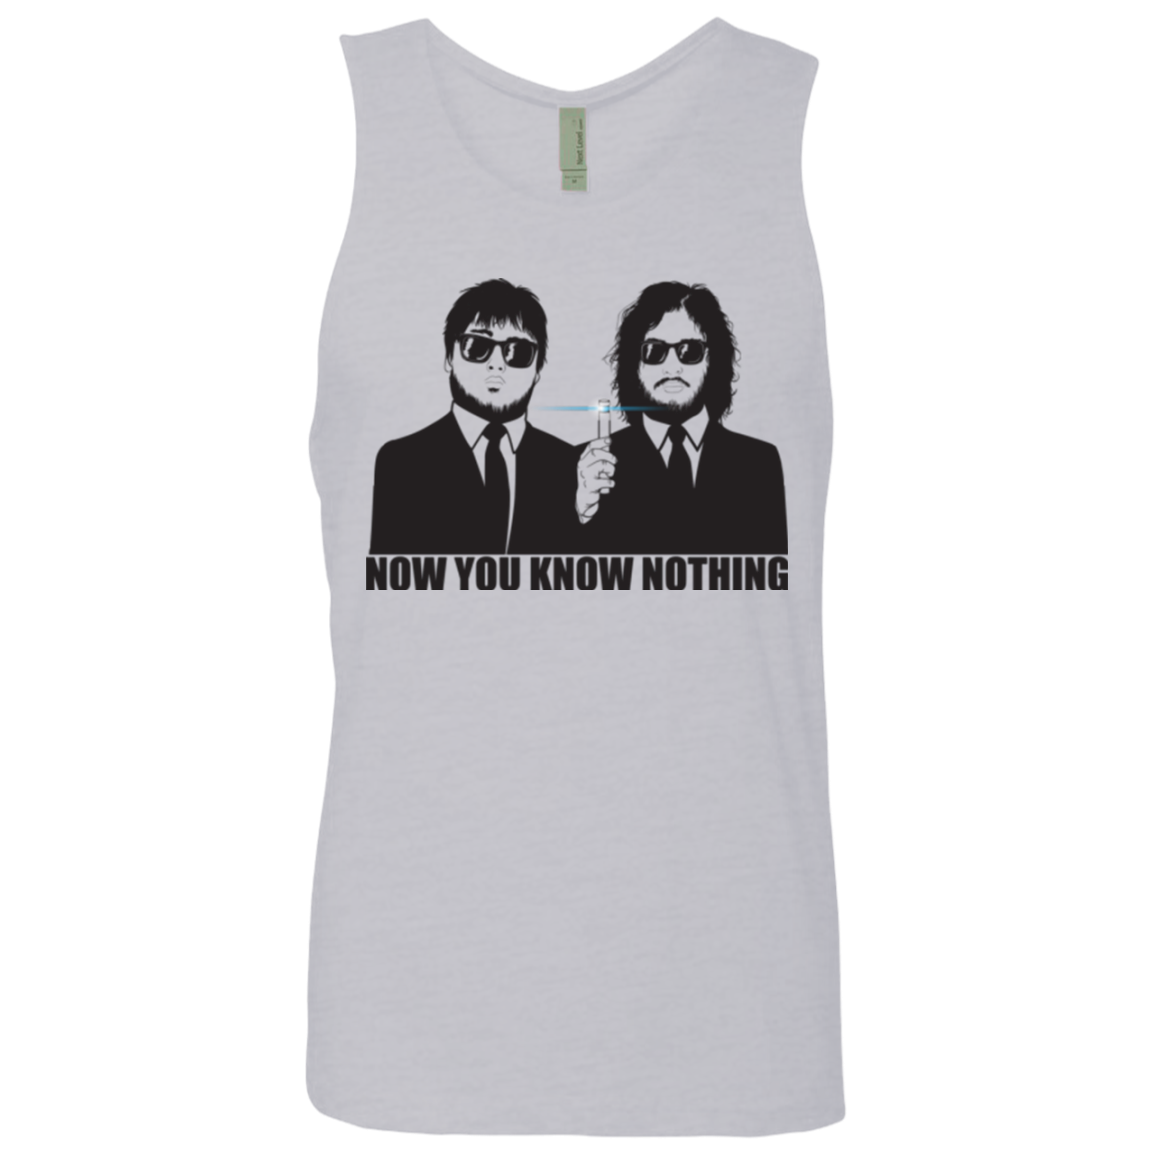 NOW YOU KNOW NOTHING Men's Premium Tank Top